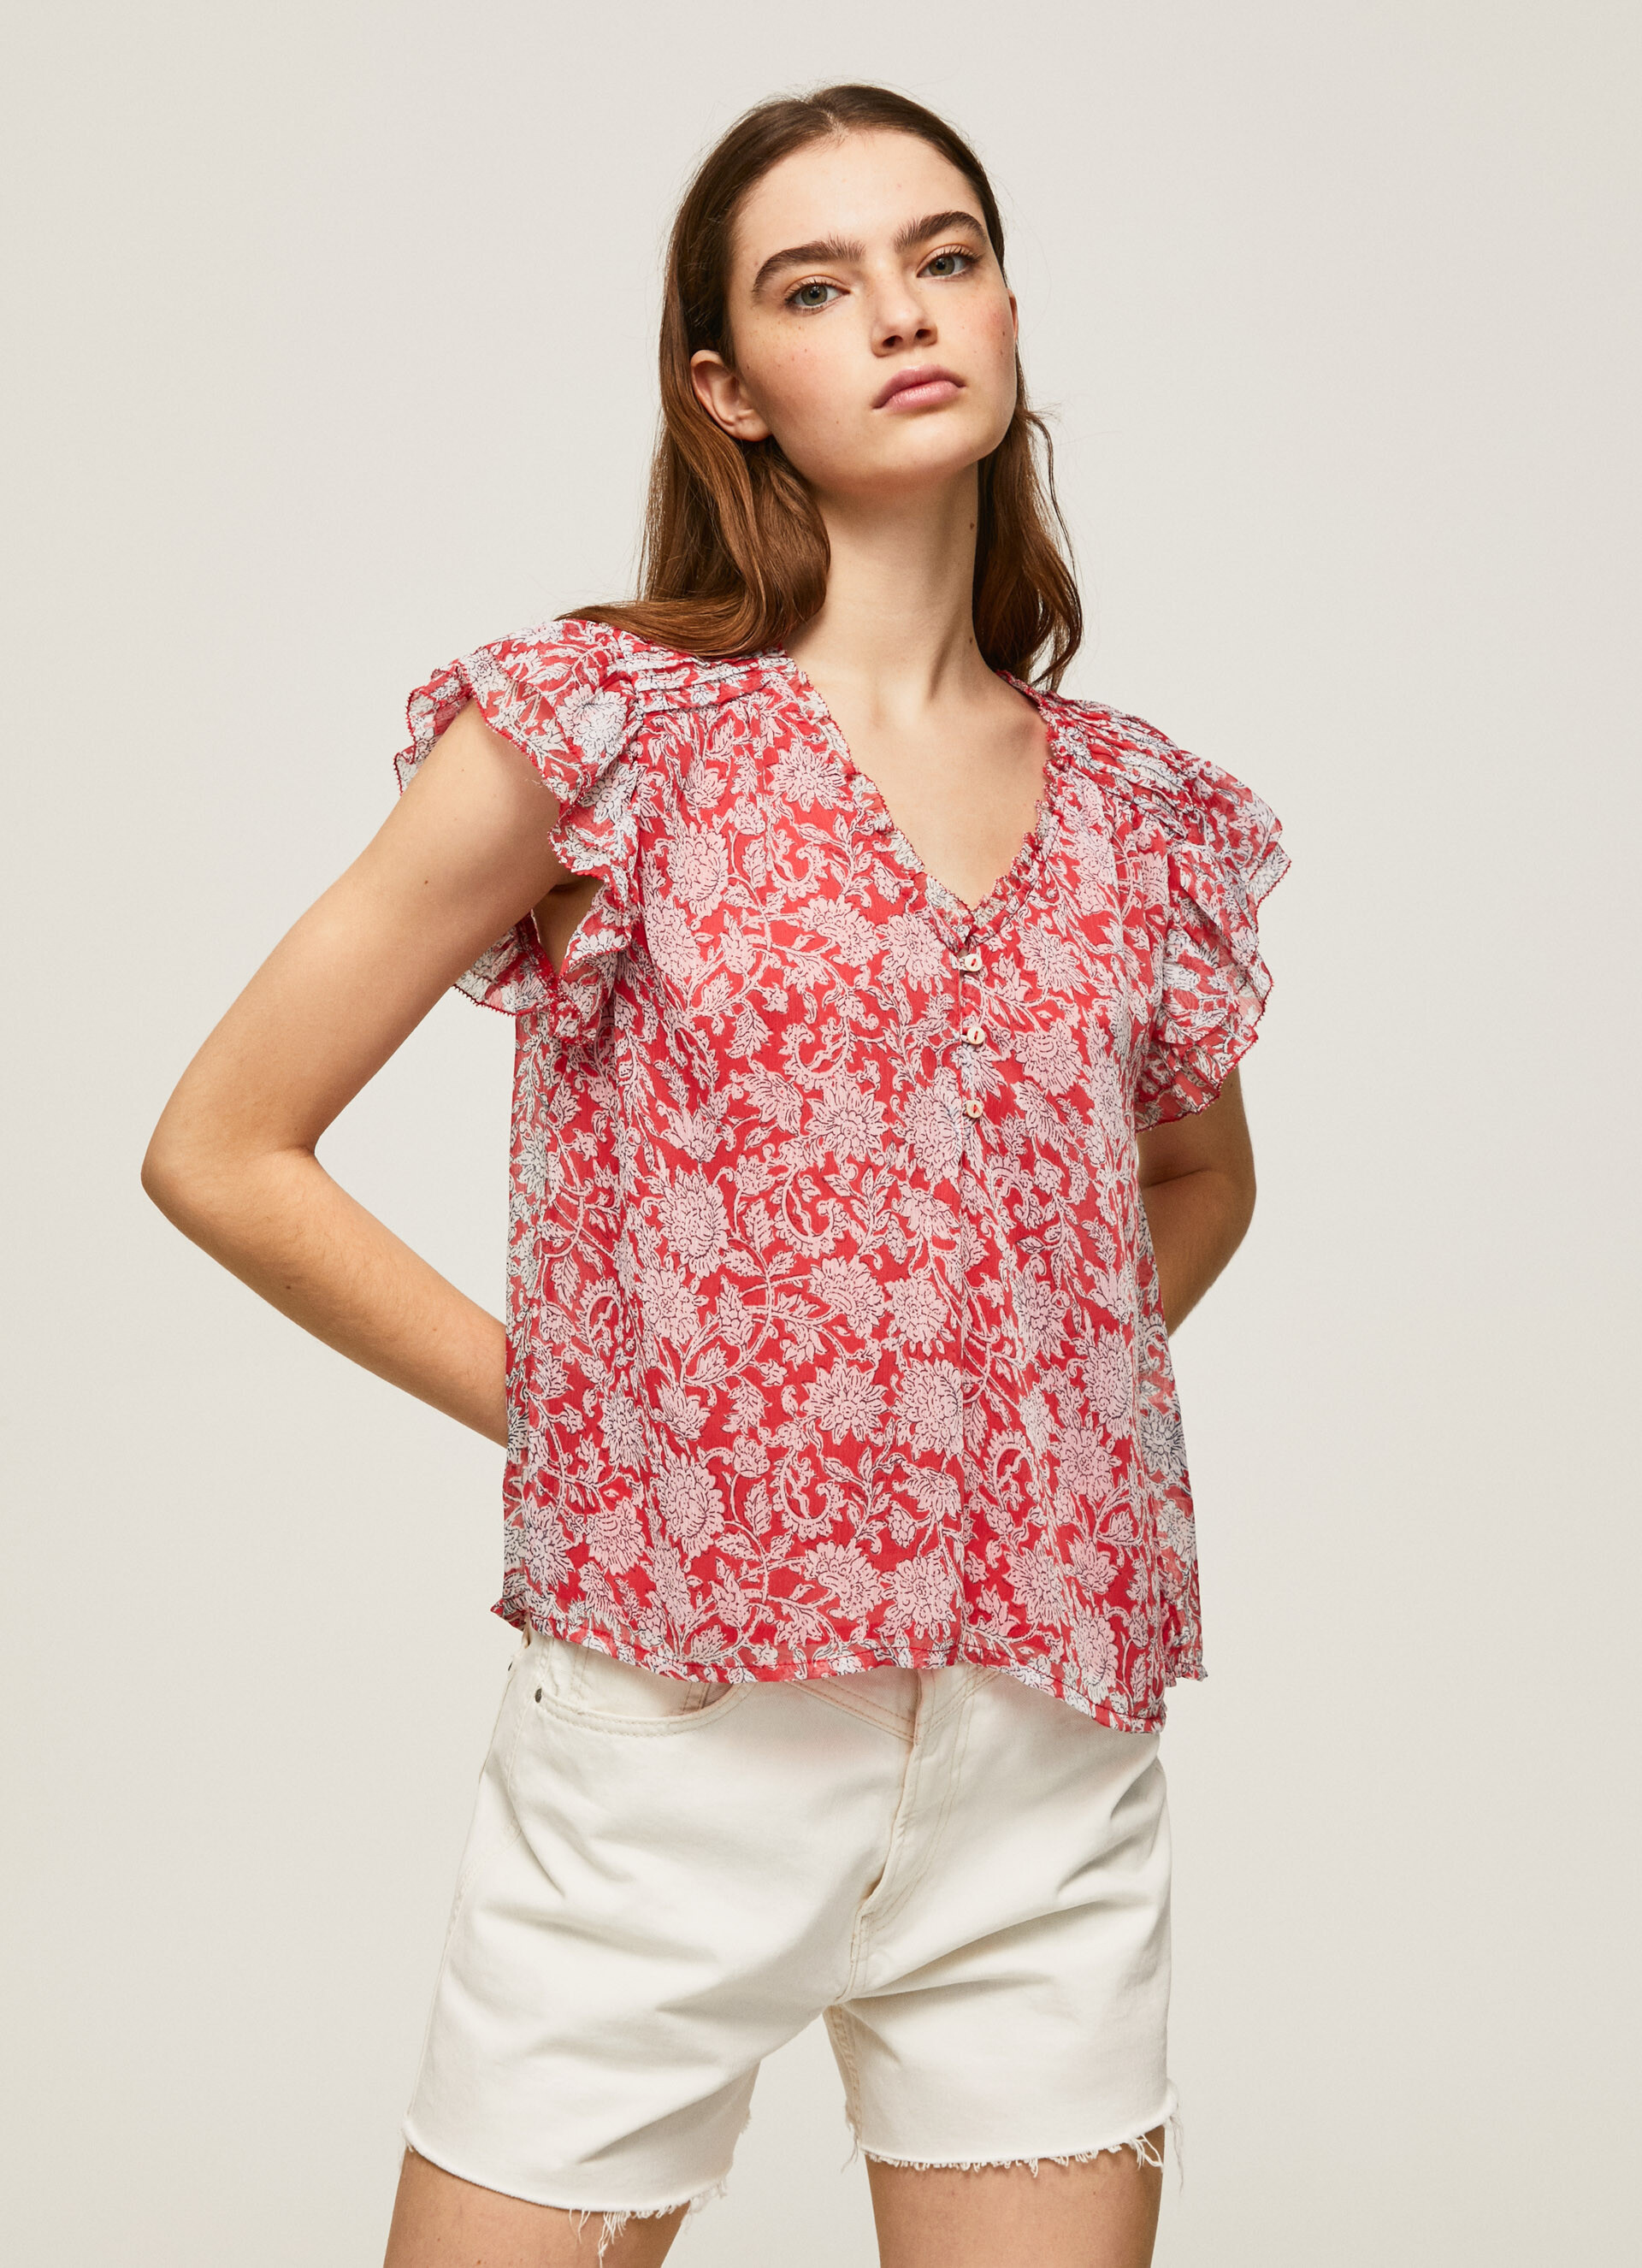 Pepe Jeans - Top a fantasia, Rosso, large image number 3